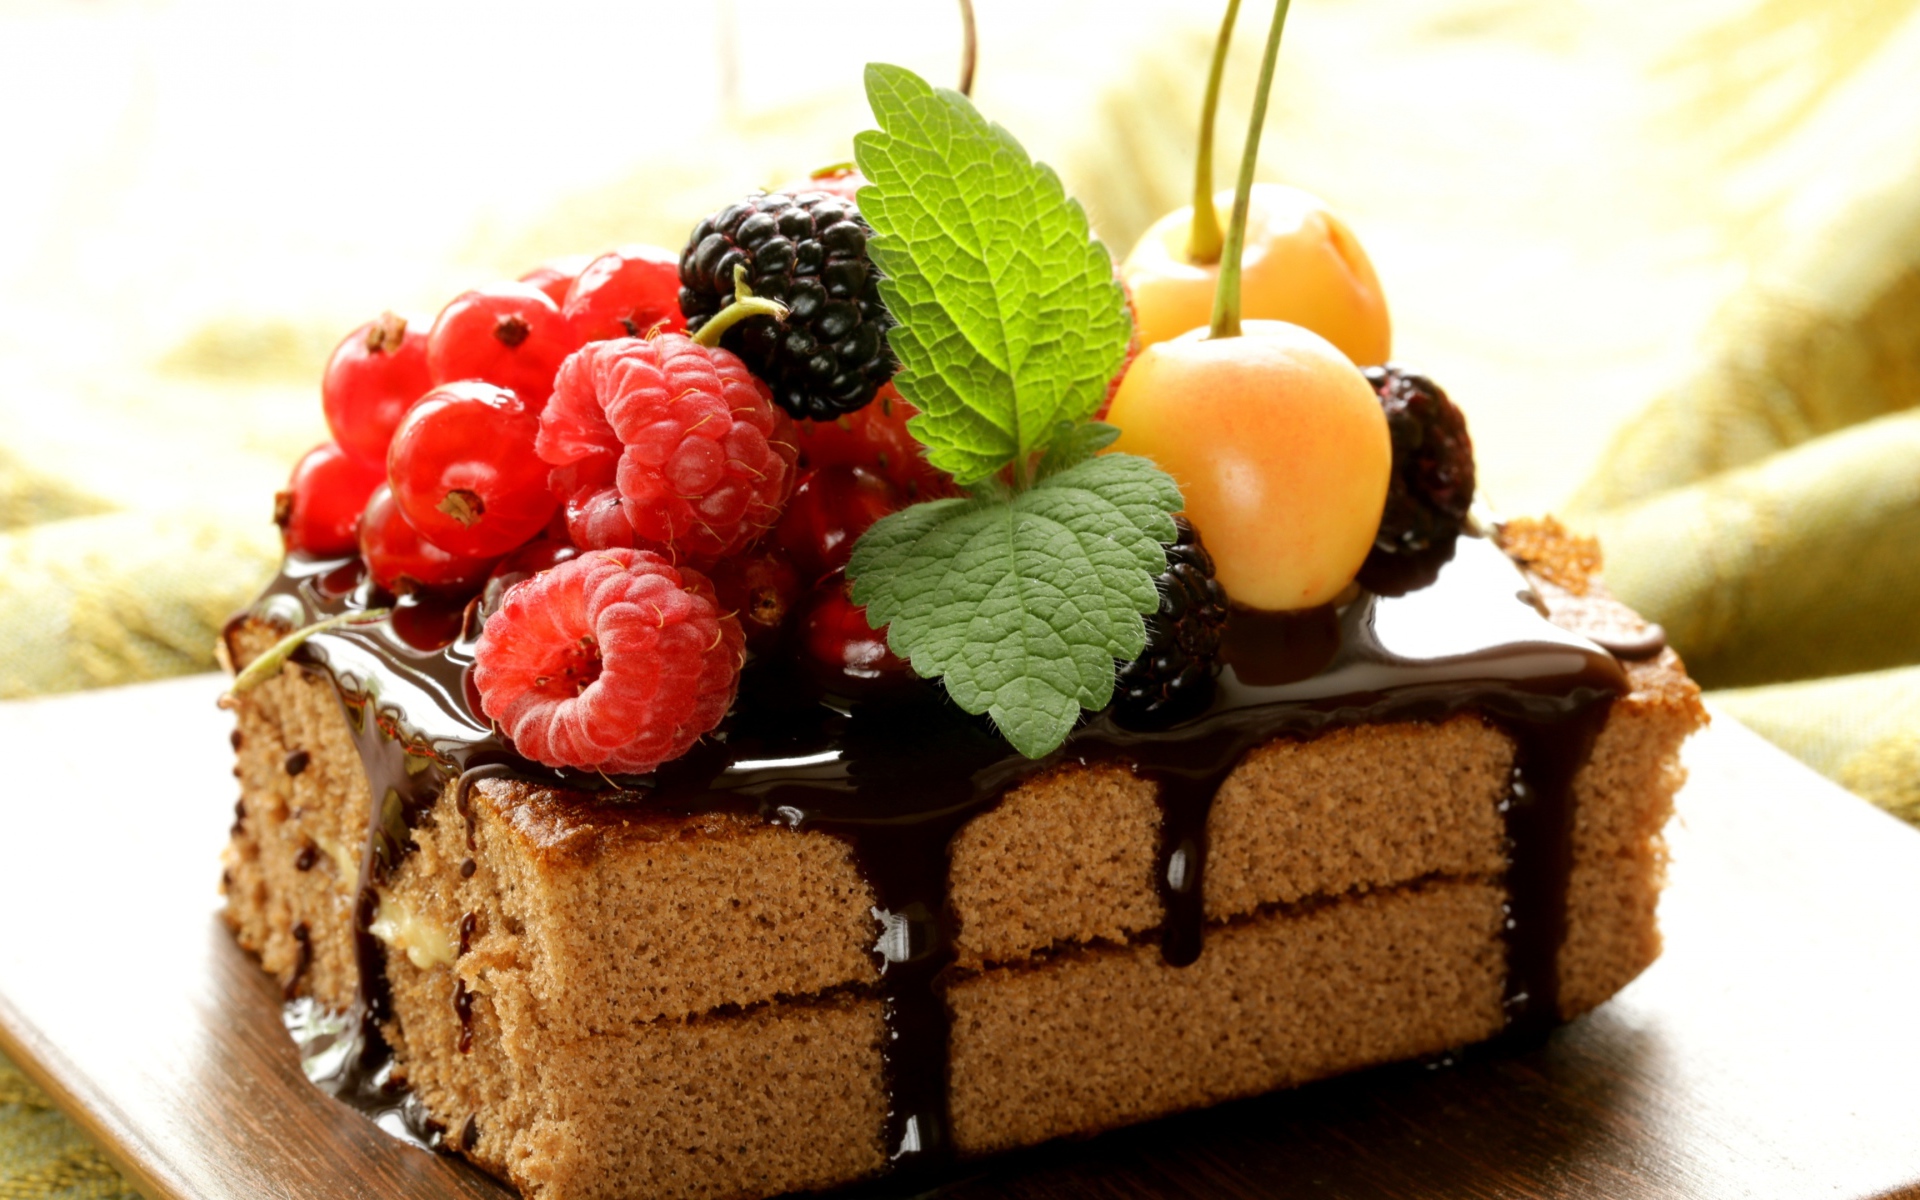 A piece of cake with chocolate and fresh berries